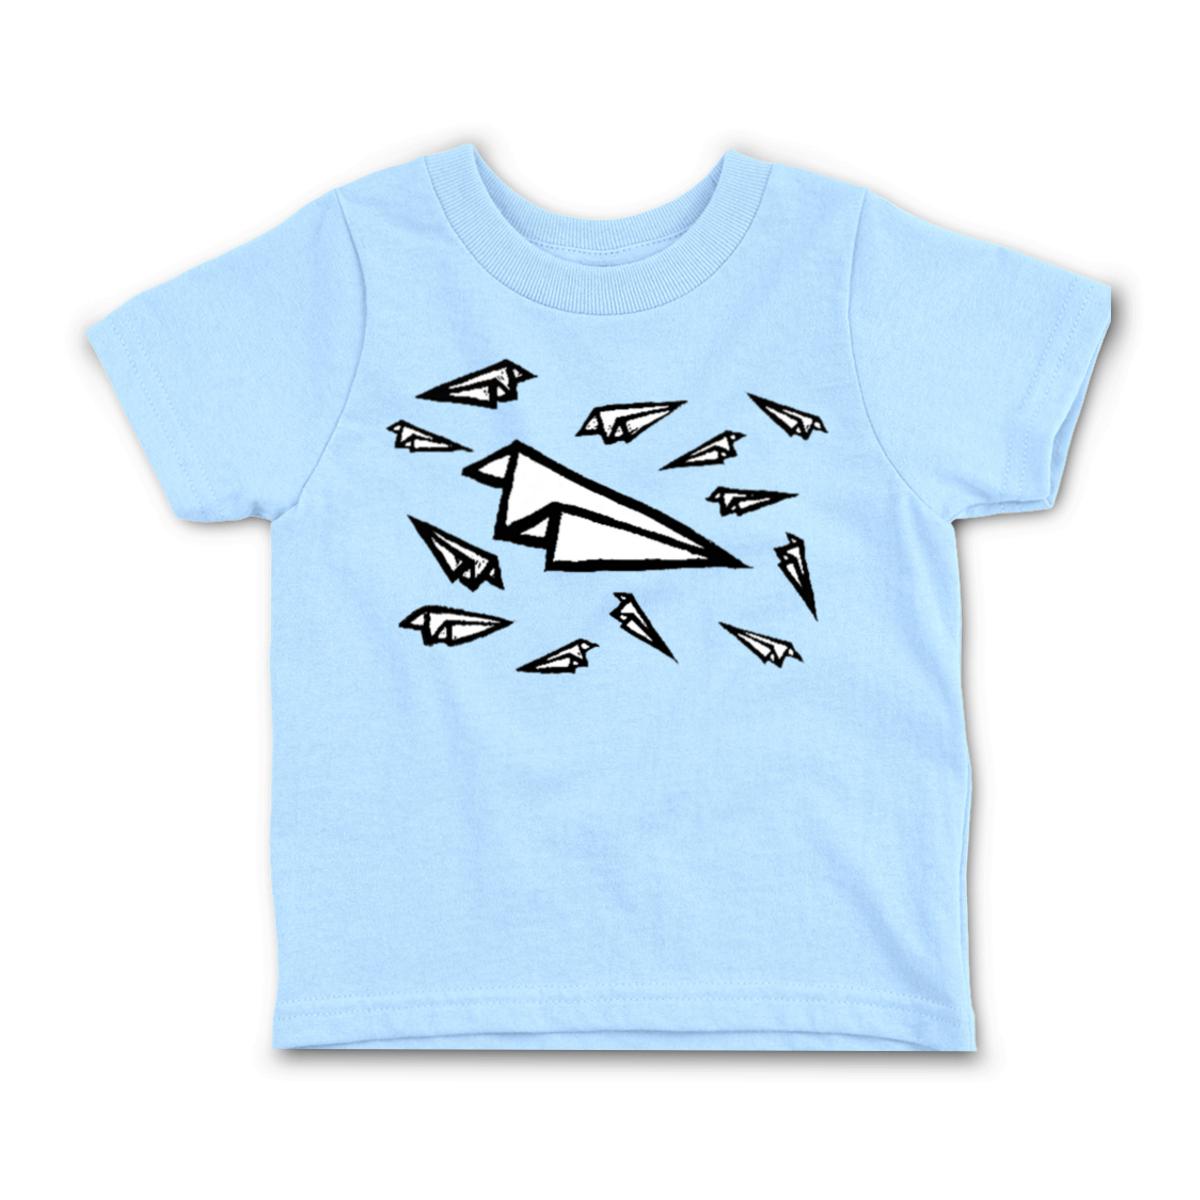 Airplane Frenzy Toddler Tee 56T light-blue